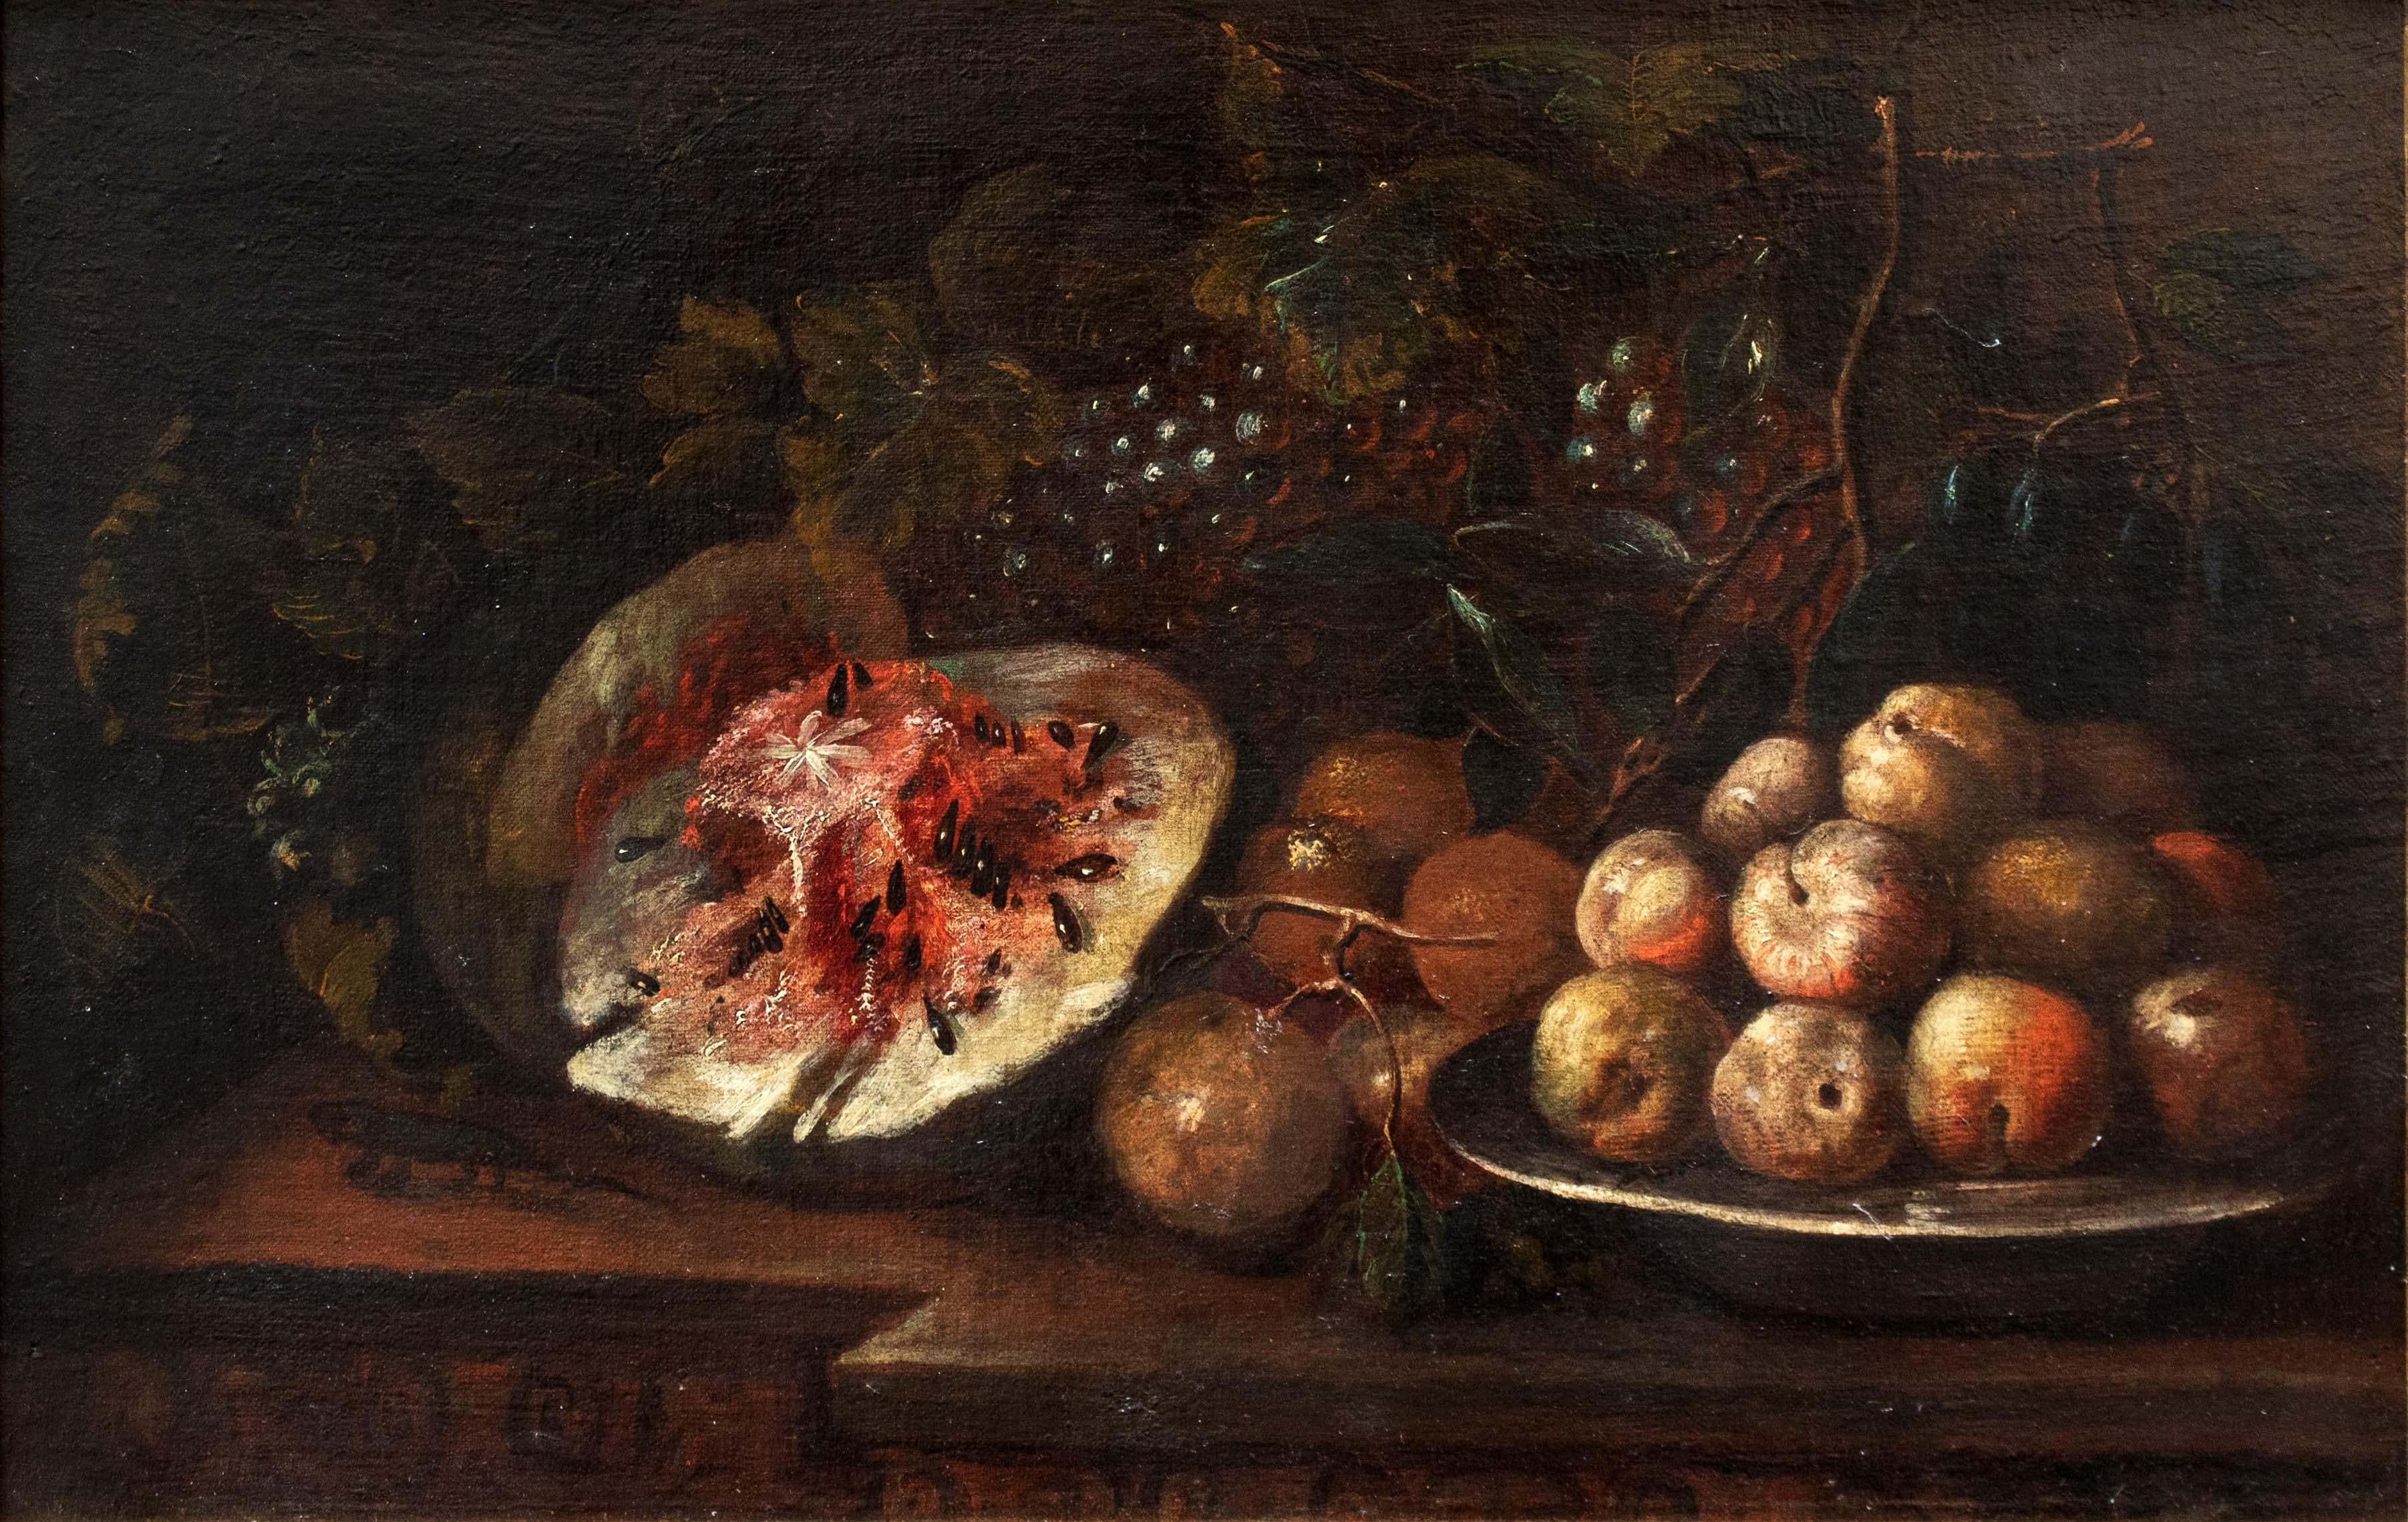 Paolo Paoletti (Padua, 1671 - Udine, 1735)

Still life with fruits on a shelf

Oil on canvas, 53.5 x 81 cm

Expert opinion Dr. Gianluca Bocchi

The still life under consideration can be attributed to the hand of Paolo Paoletti (1671 -1735). Born in